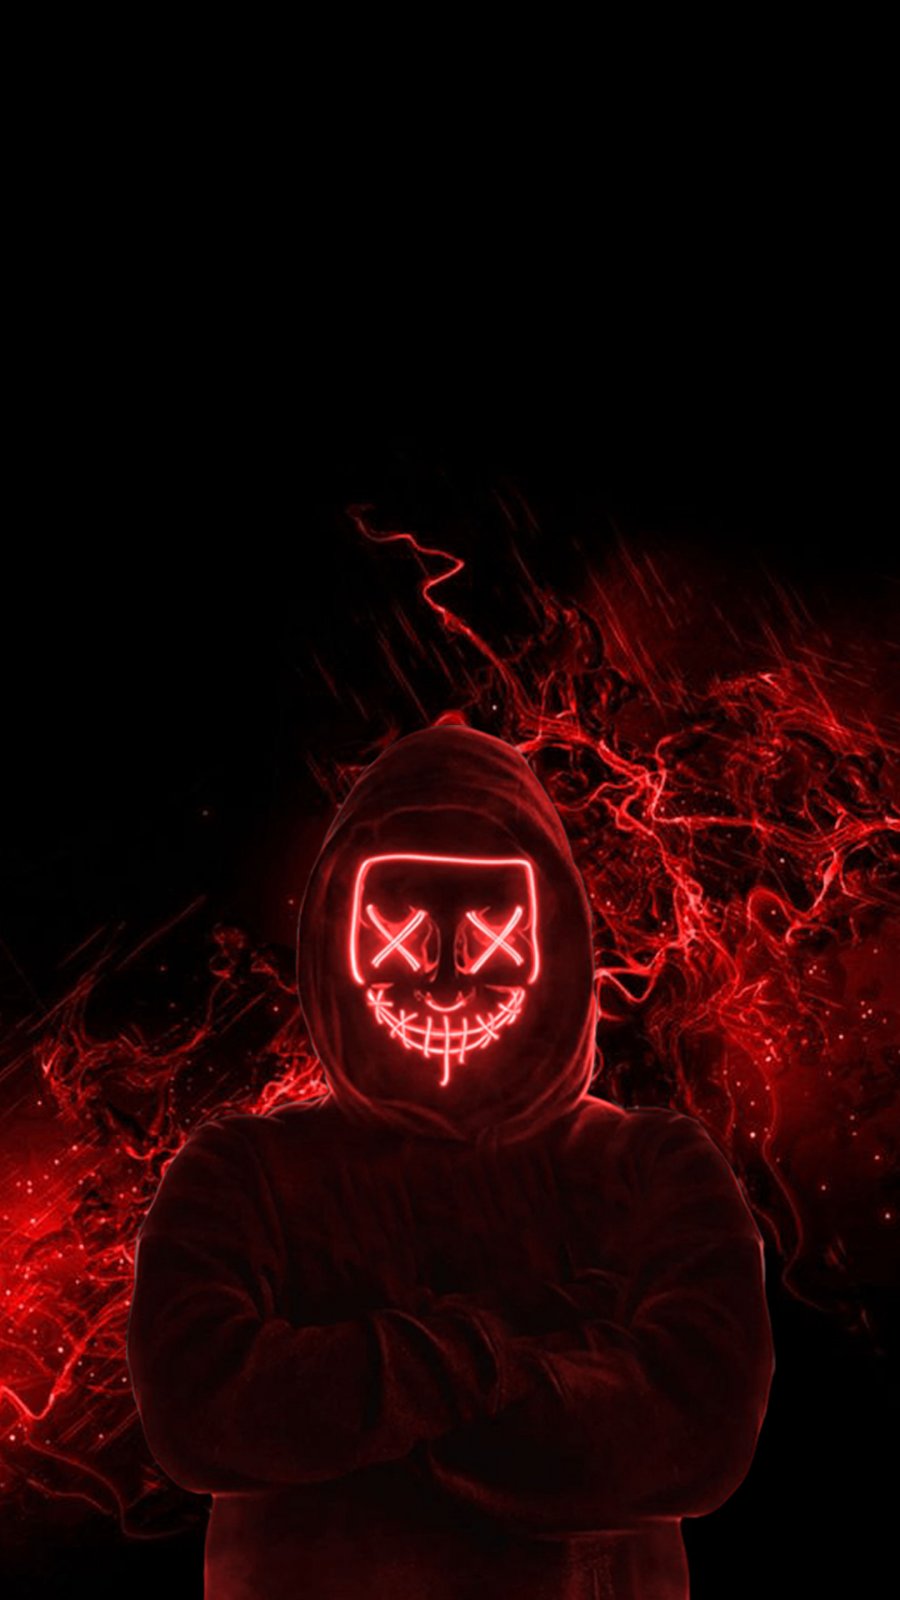 Red Neon Mask IPhone Wallpaper - IPhone Wallpapers : iPhone Wallpapers